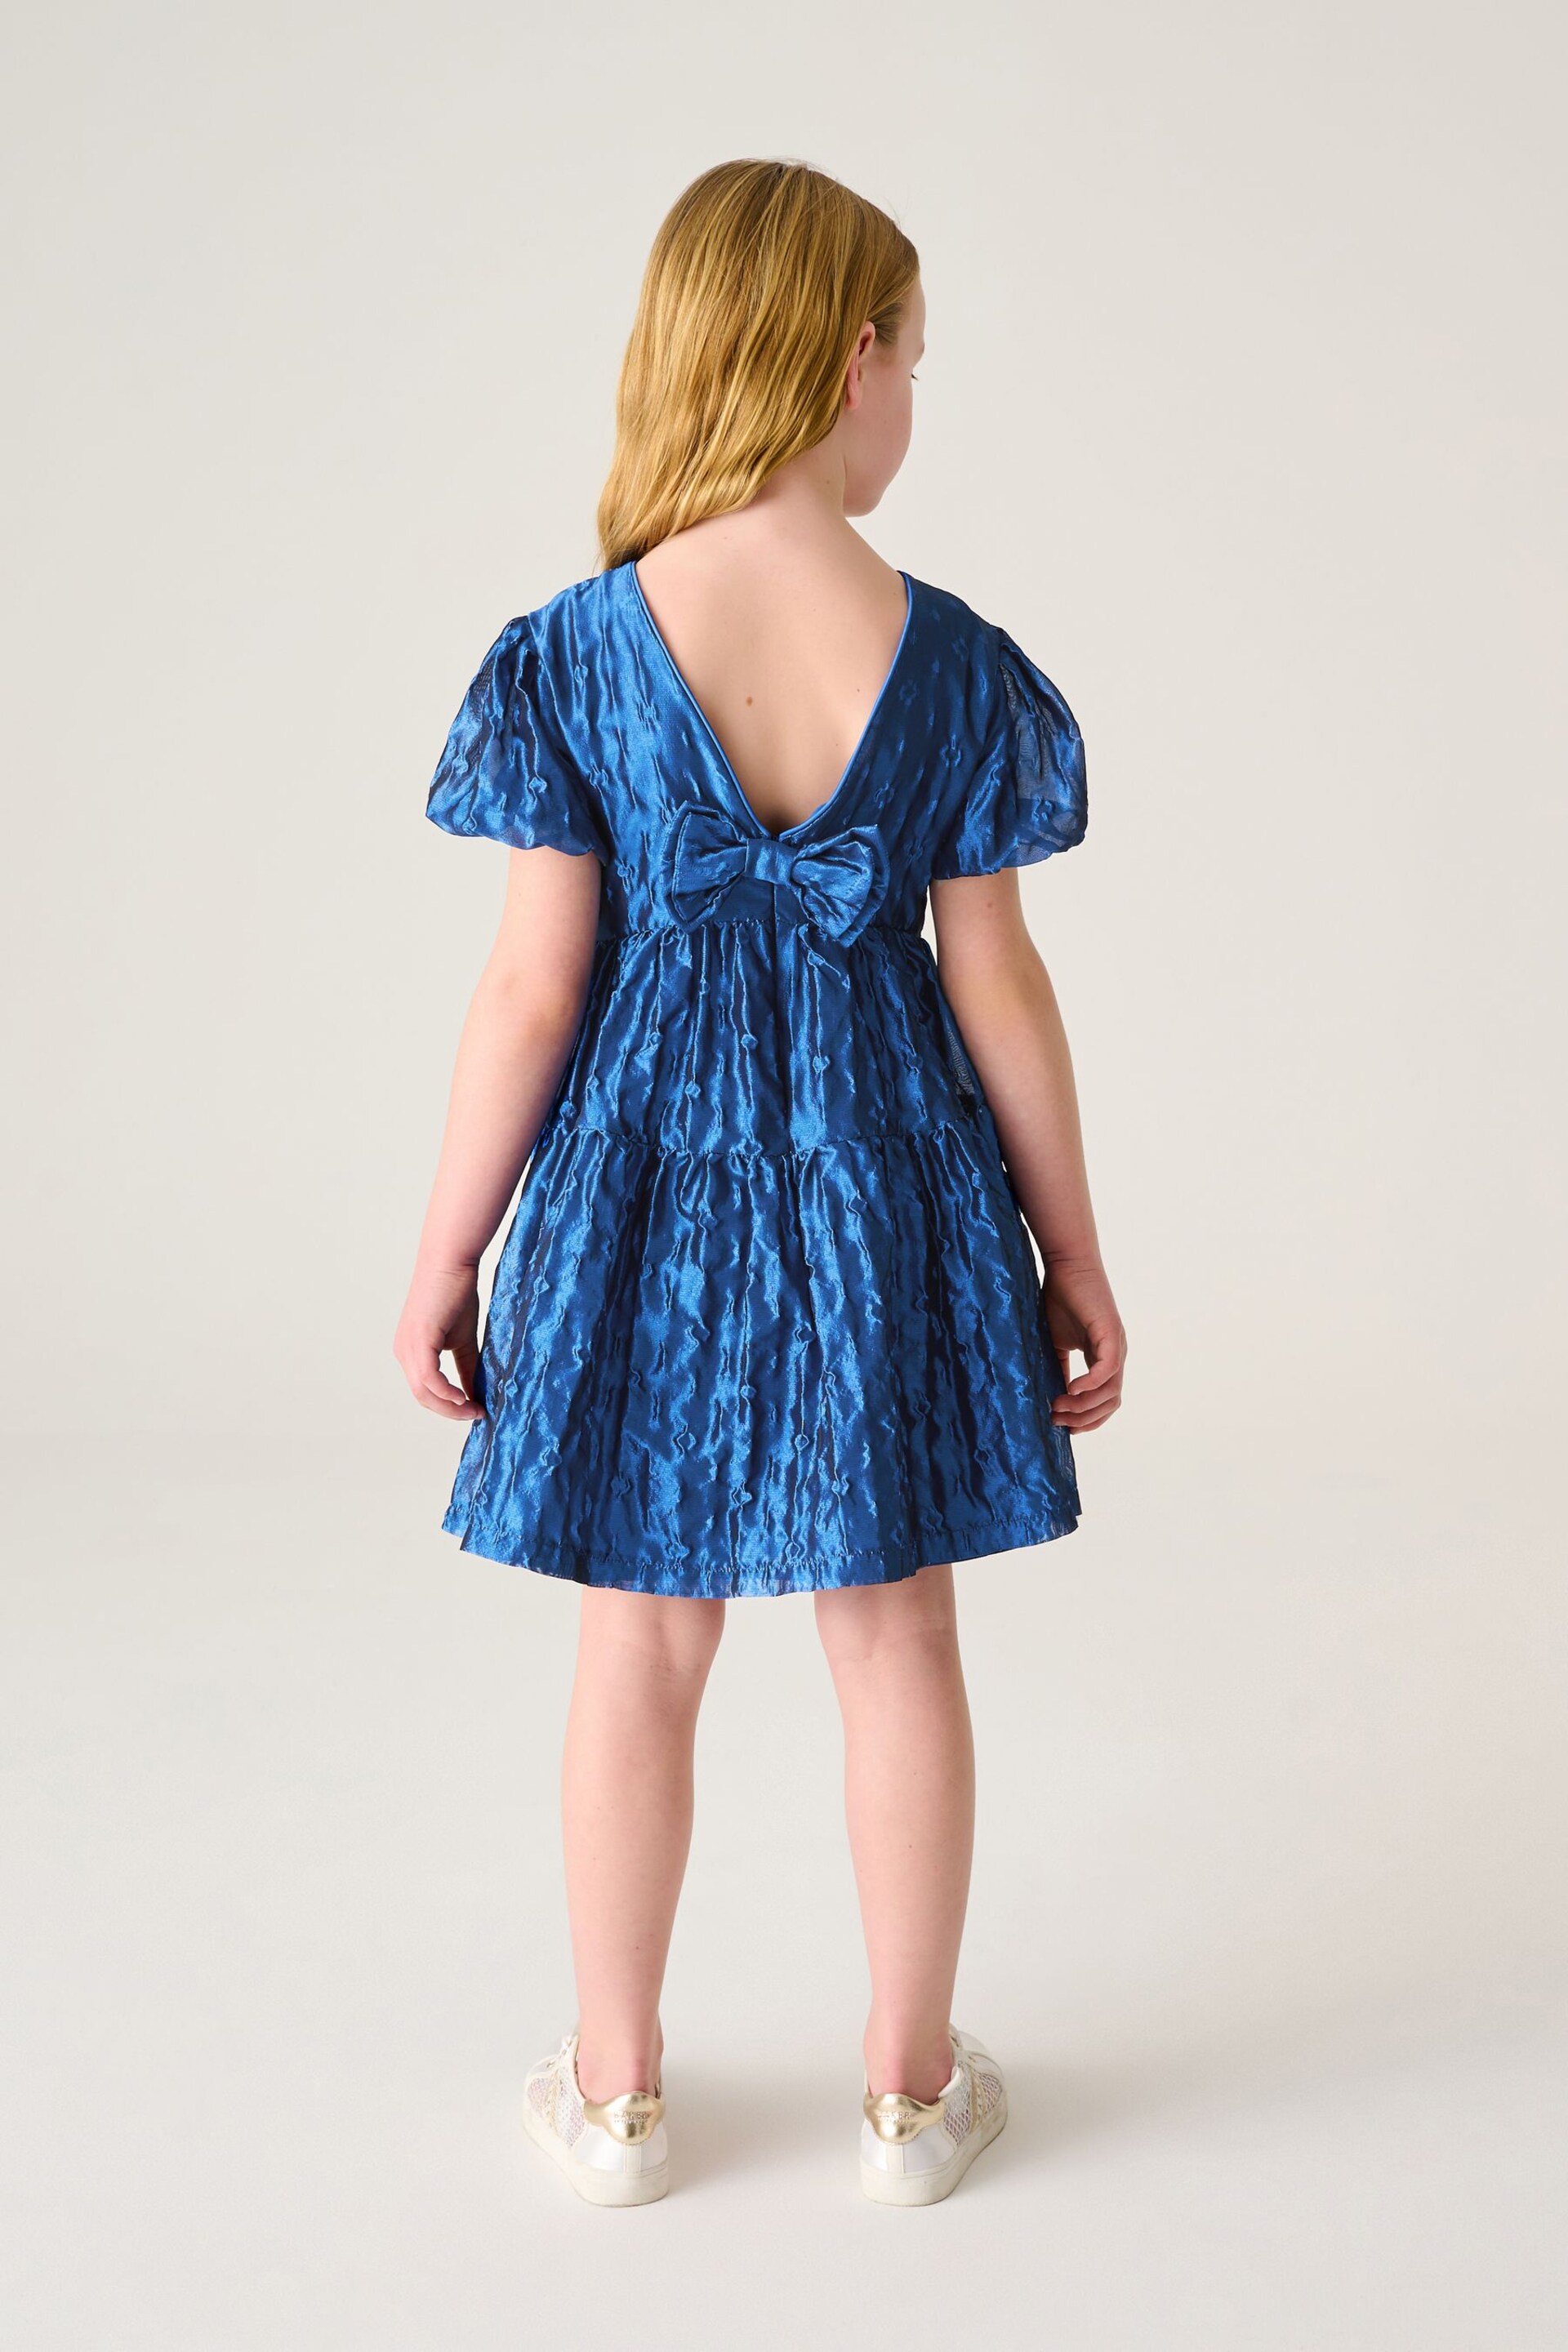 Baker by Ted Baker Blue Cloque Dress - Image 2 of 10